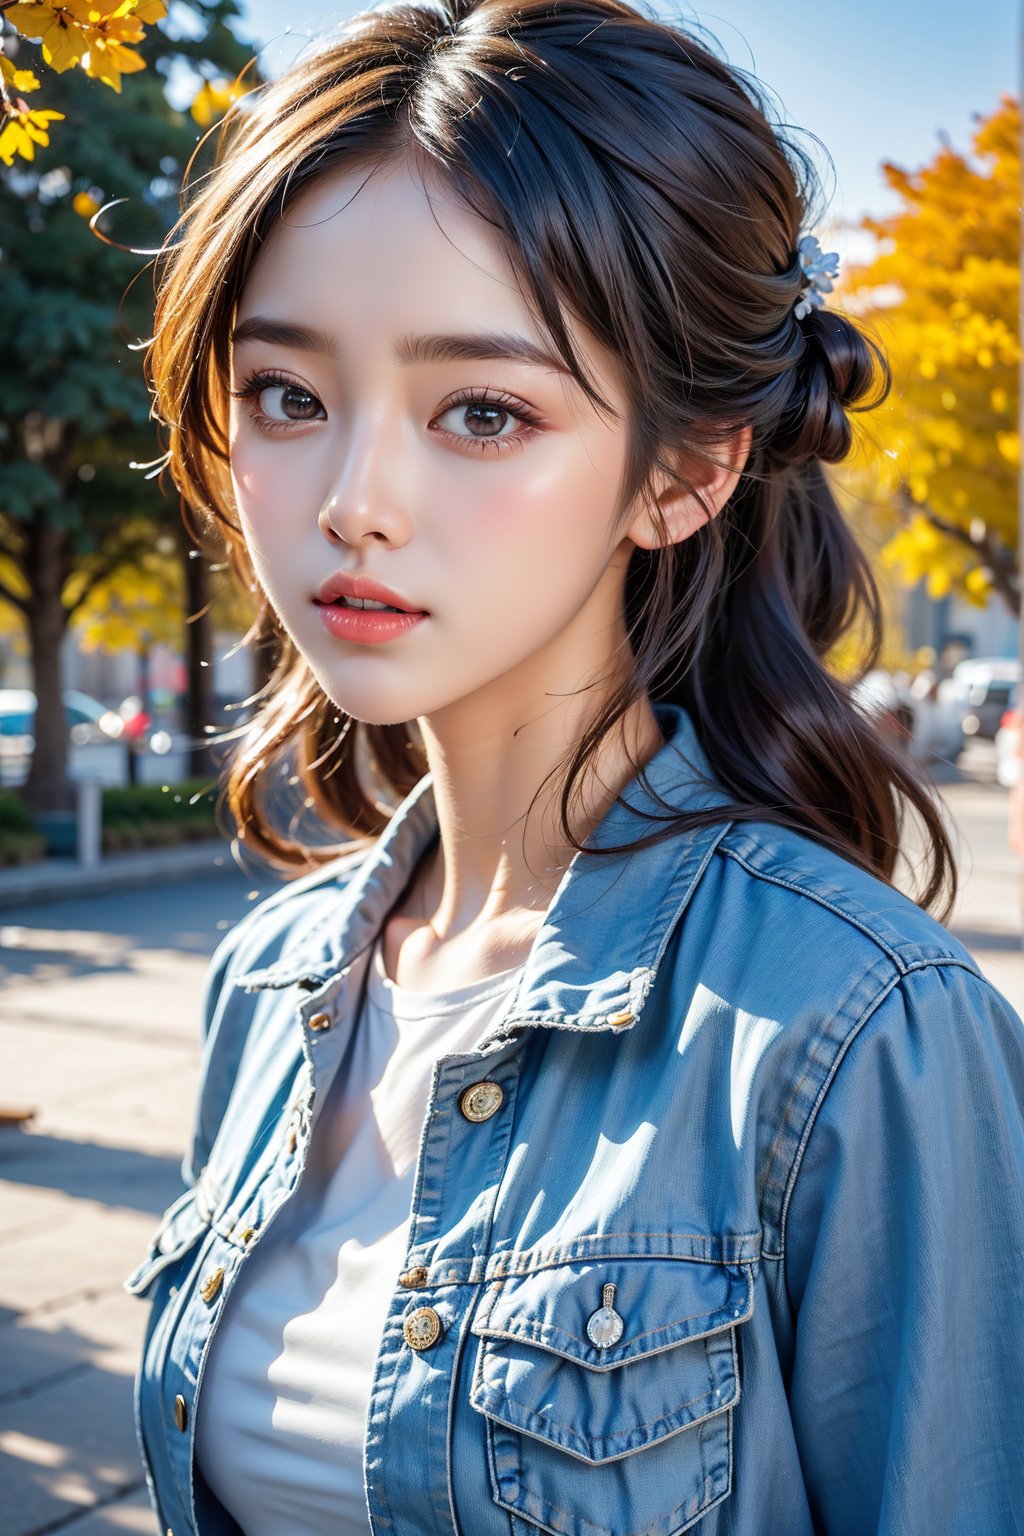 8k, (masterpiece:1.3), ultra-realistic, UHD, highly detailed, best quality, 1girl, petite, distant short, full_body, close up portrait of self-assurance (AIDA_LoRA_HanF:1.1) as (12 years old girl:1.1) standing in the park, (wearing denim jacket:1.1), beautiful realistic girl, cute girl, skinny, slim, fitness, natural hair, dynamic pose, cinematic, dramatic, hyper realistic, studio photo, hdr, f1.6, getty images, (colorful:1.1),perfect light,beauty,Beauty,Korean